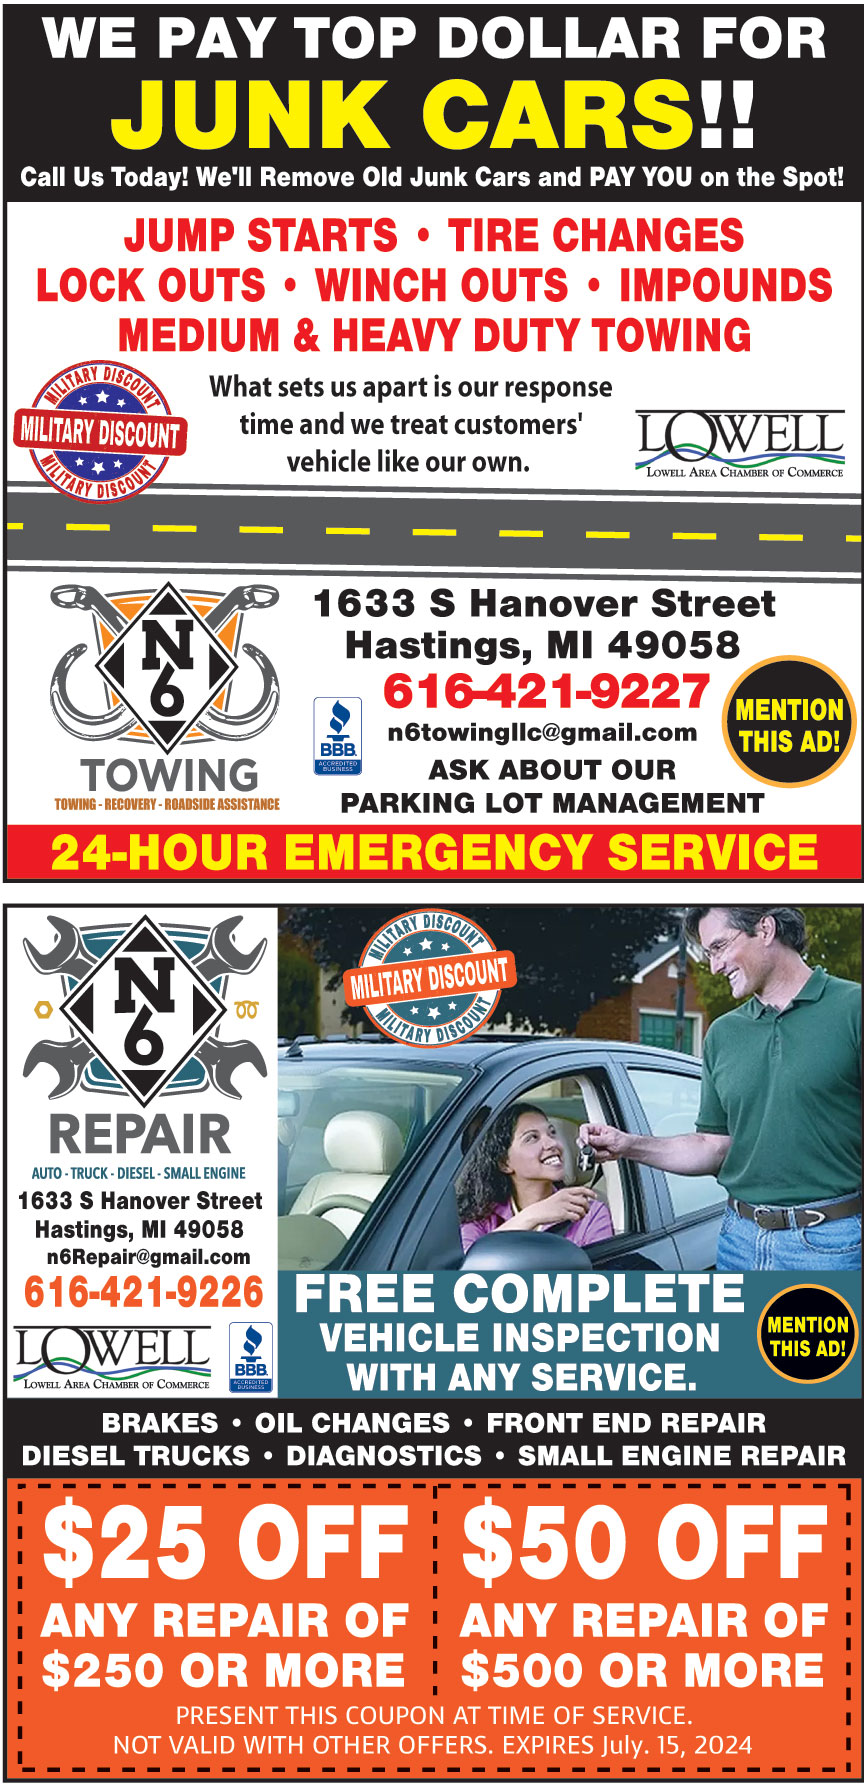 N6 TOWING AND RECOVERY